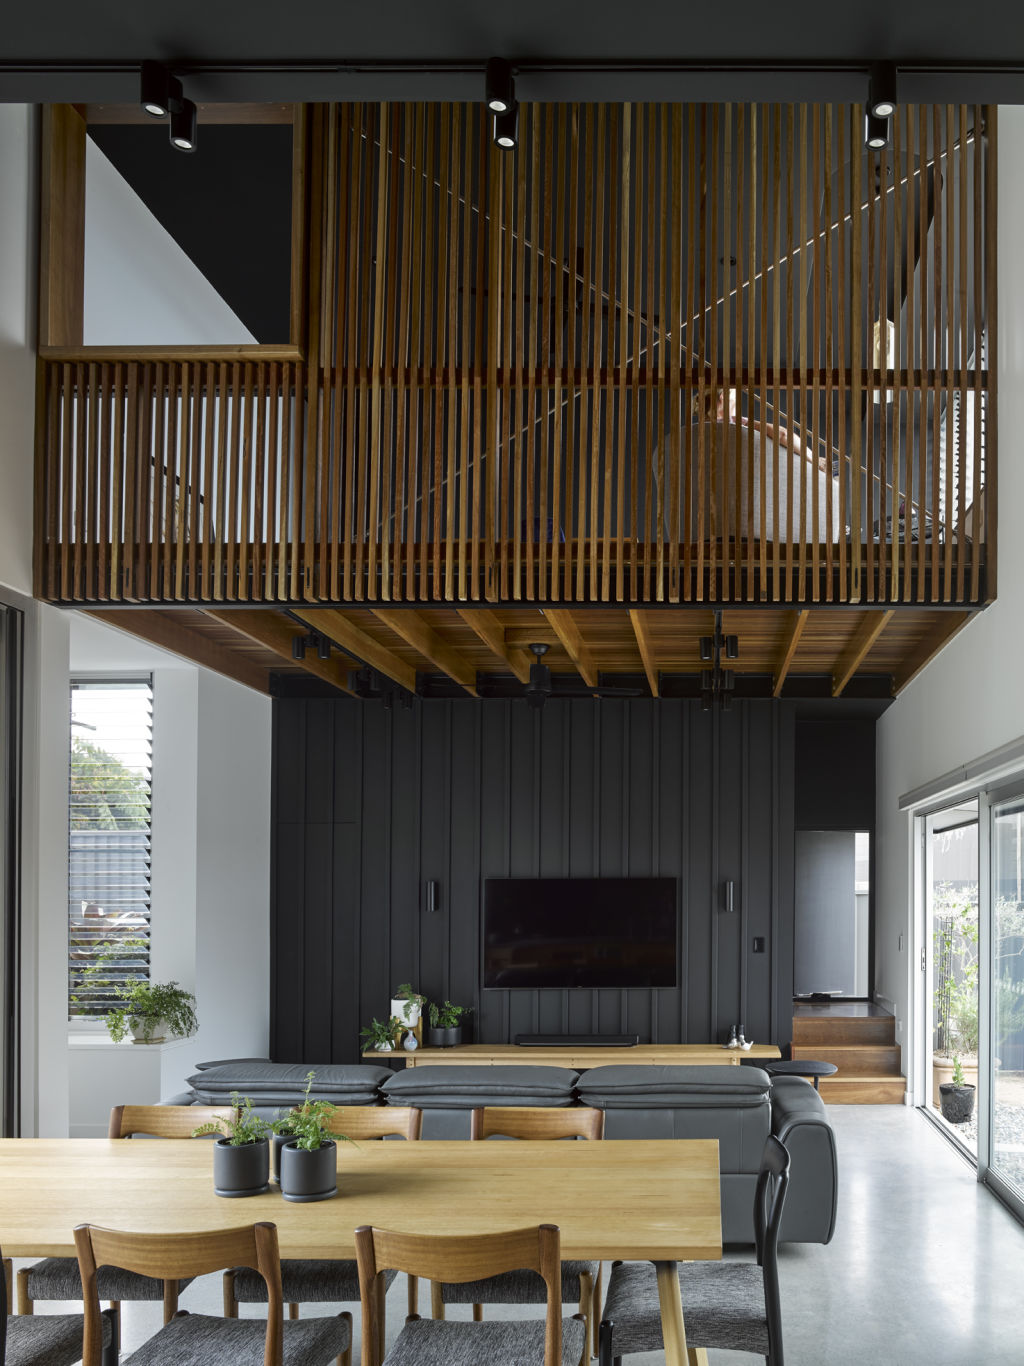 The renovation was all about interconnected rooms and open-plan living. Photo: Christopher Frederick Jones